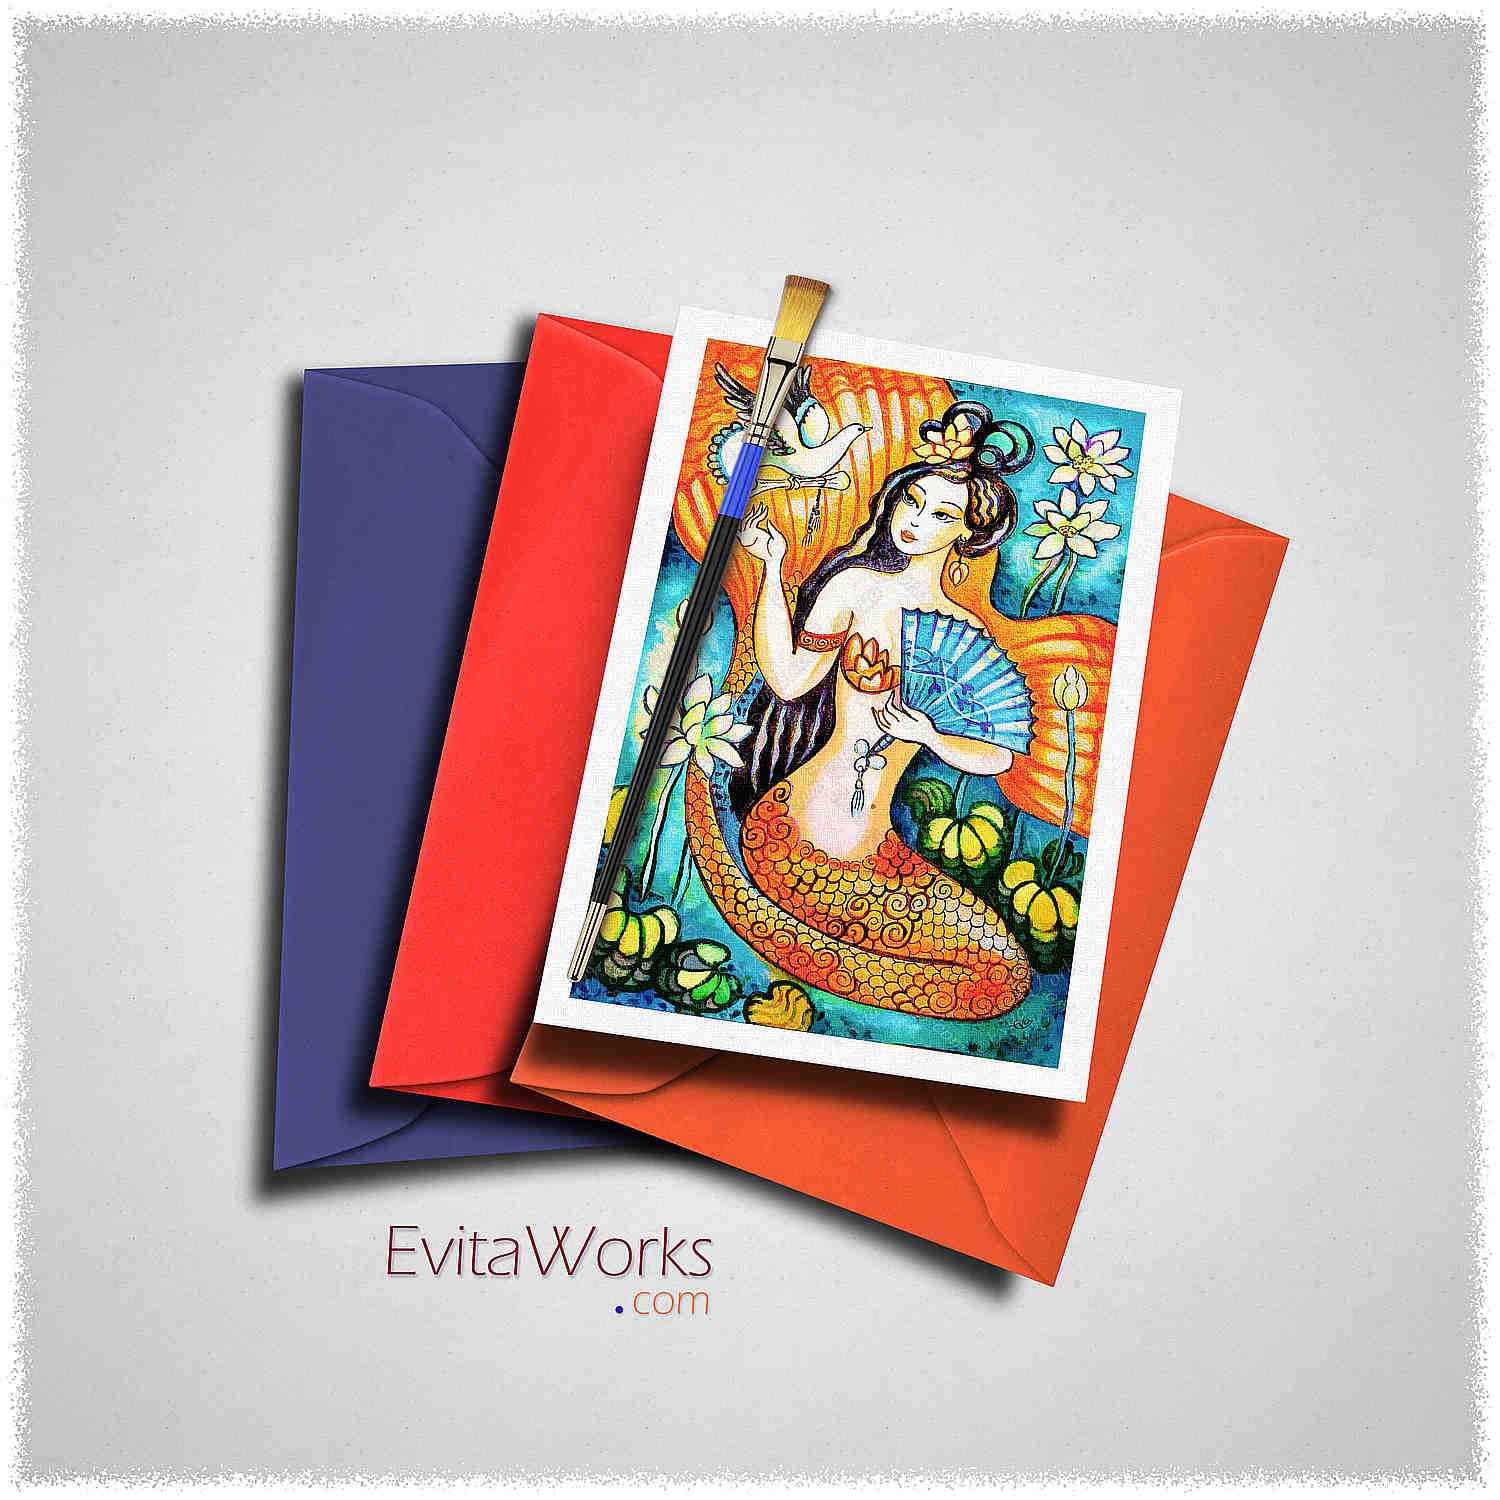 Hit to learn about "A Letter from Far Away, Asian mermaid" on cards